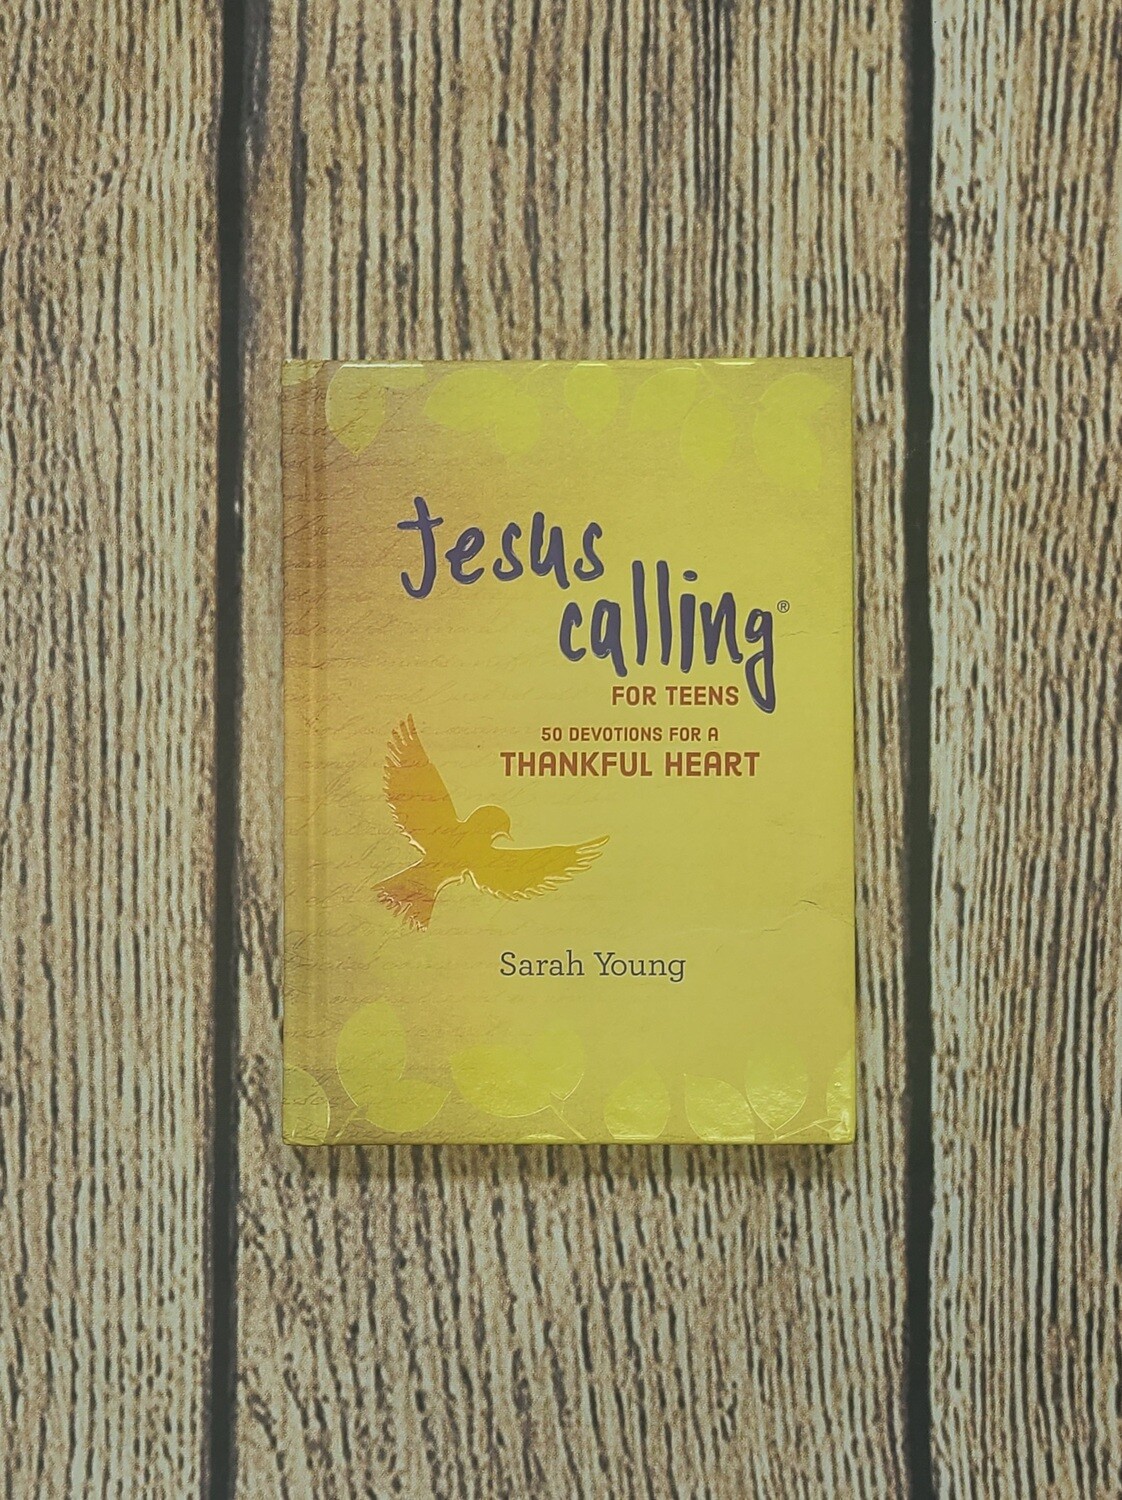 Jesus Calling for Teens: 50 Devotions for a Thankful Heart by Sarah Young